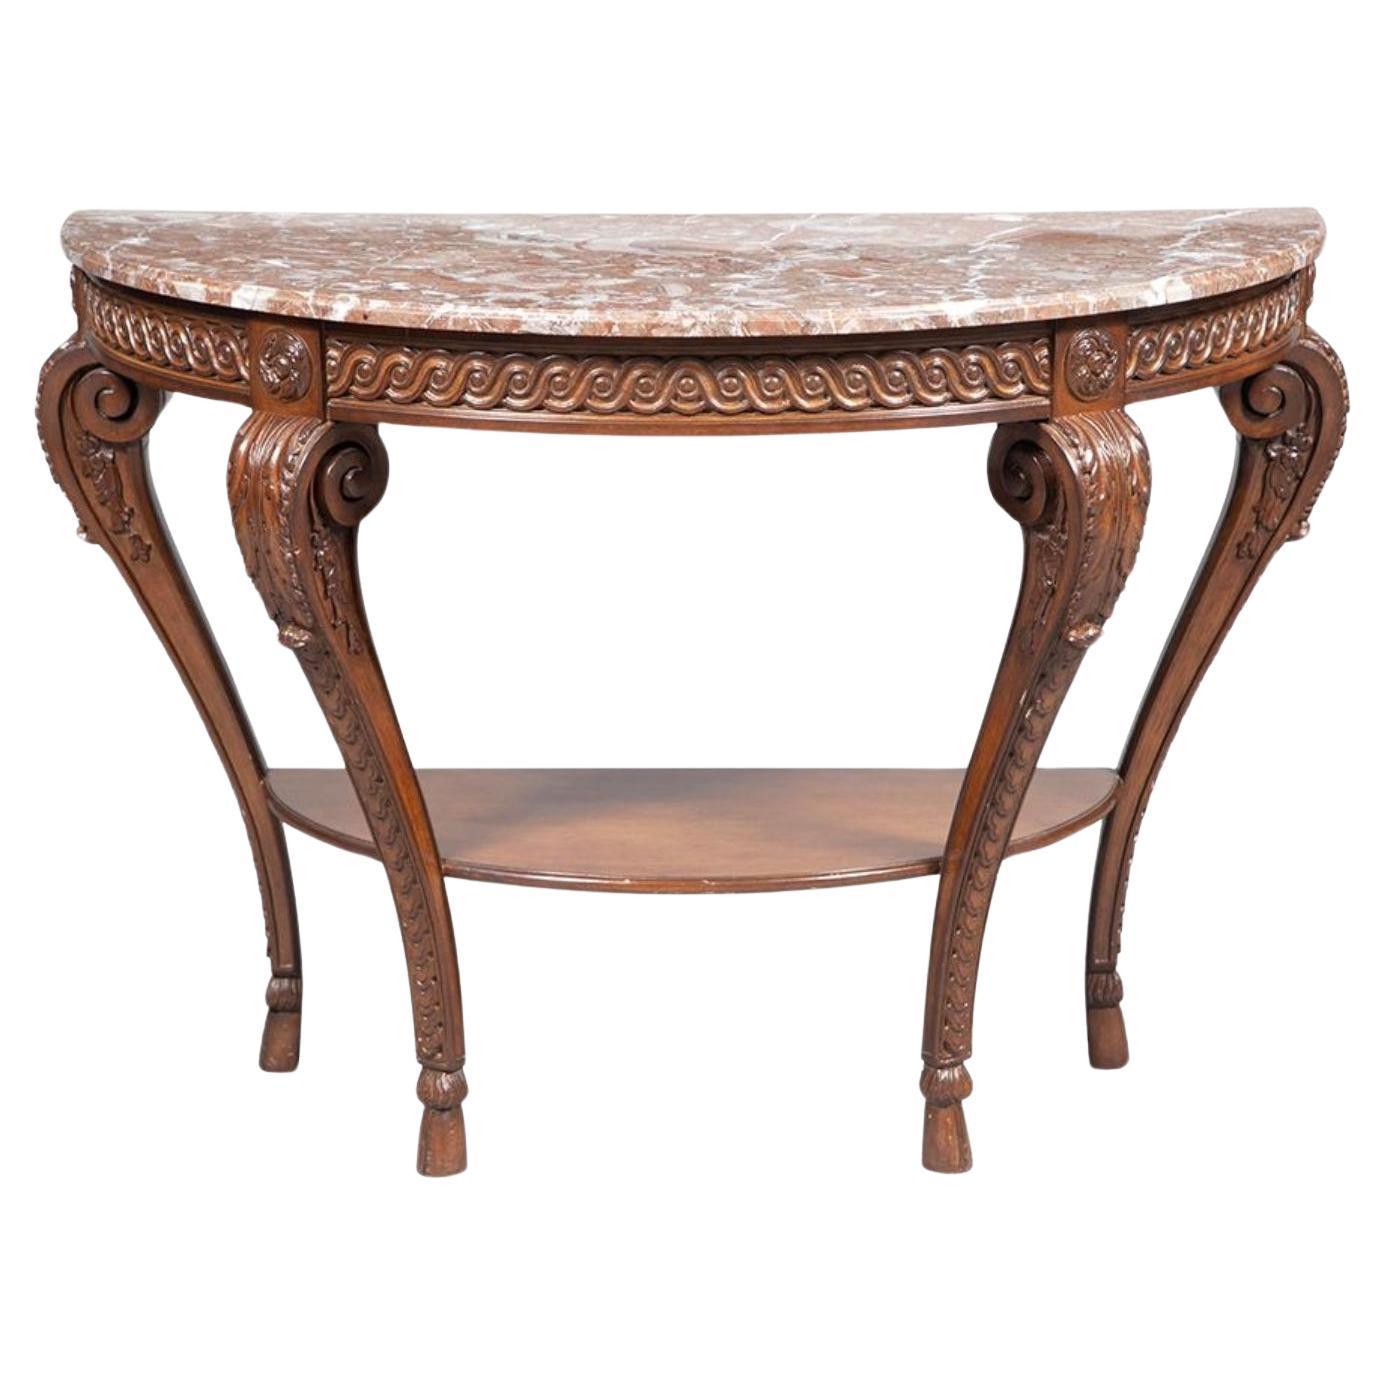  Louis XVI Style Walnut Framed Marble Top Demilune Console Table